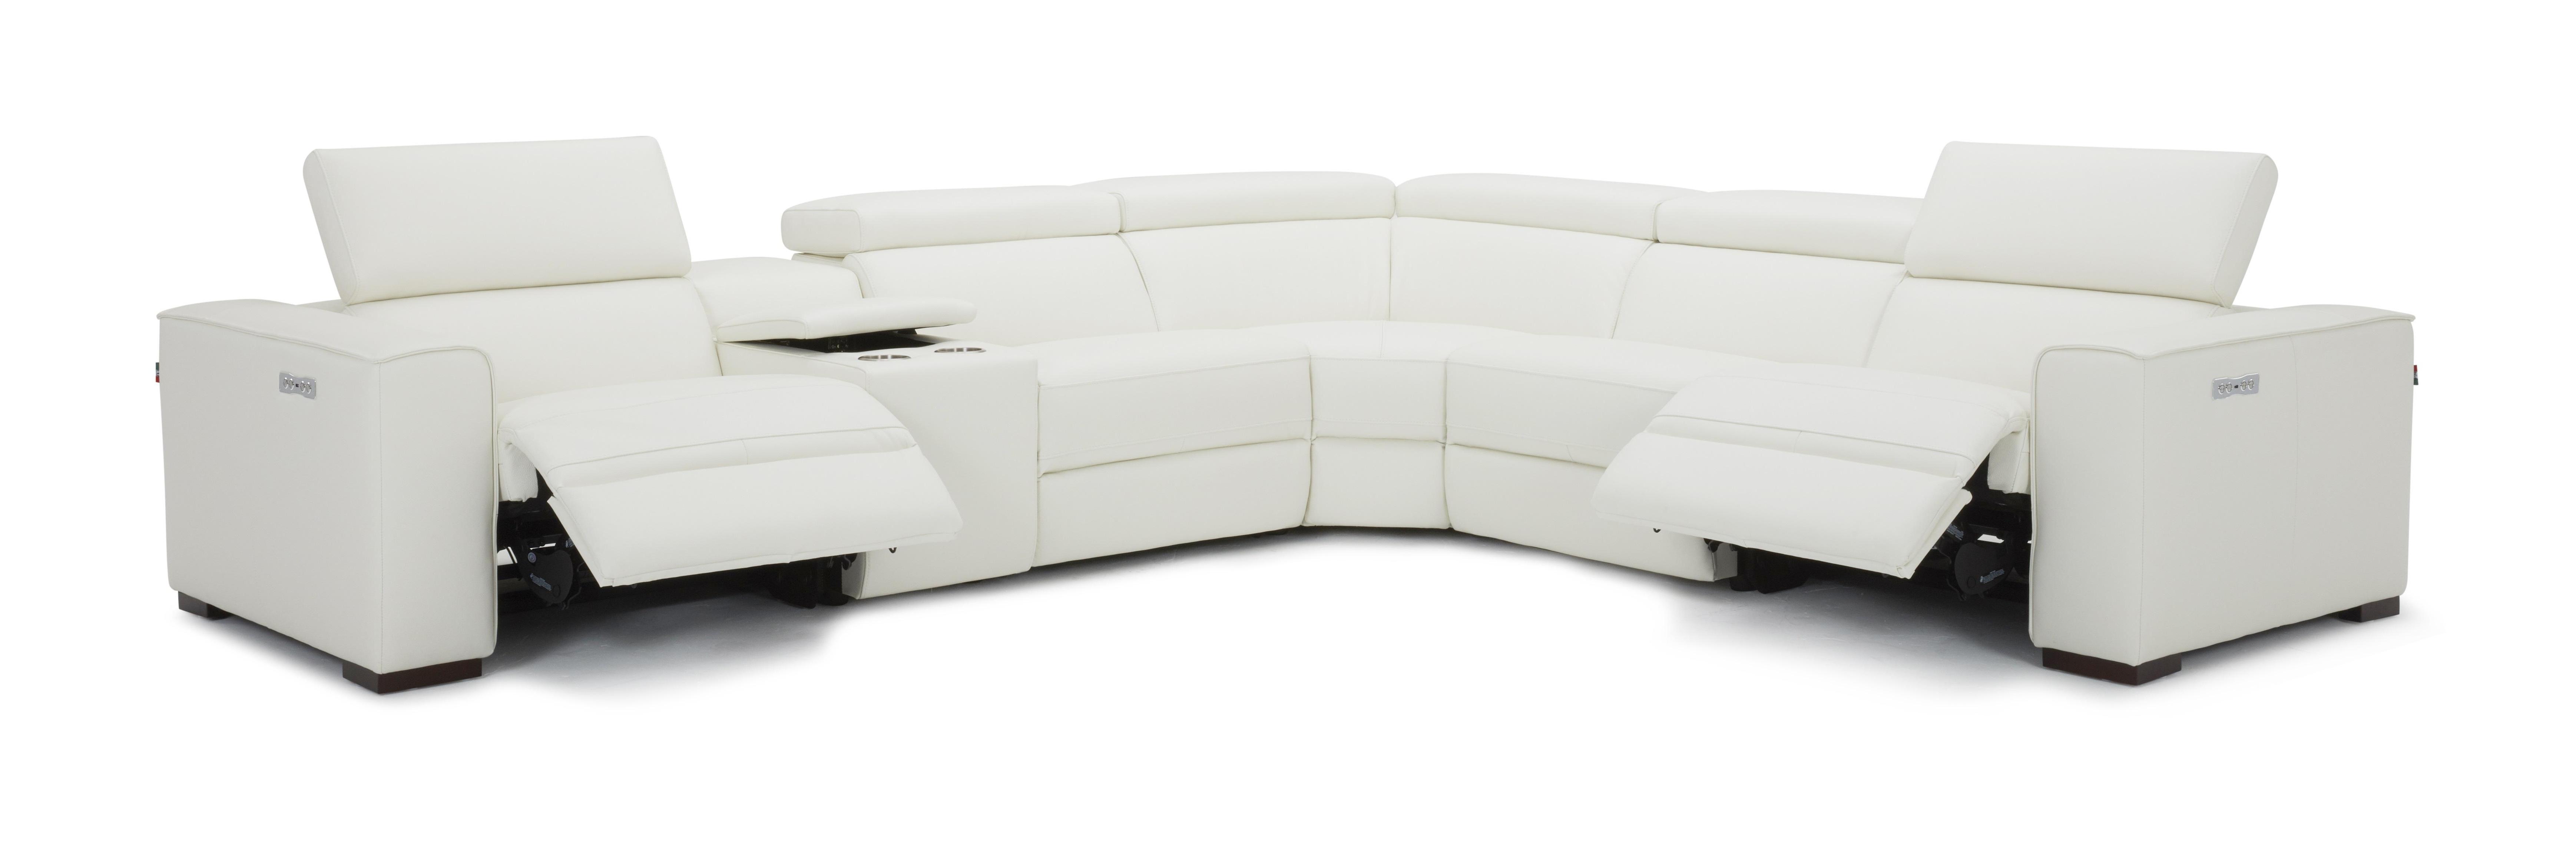 J&M Furniture Picasso Reclining Sectional